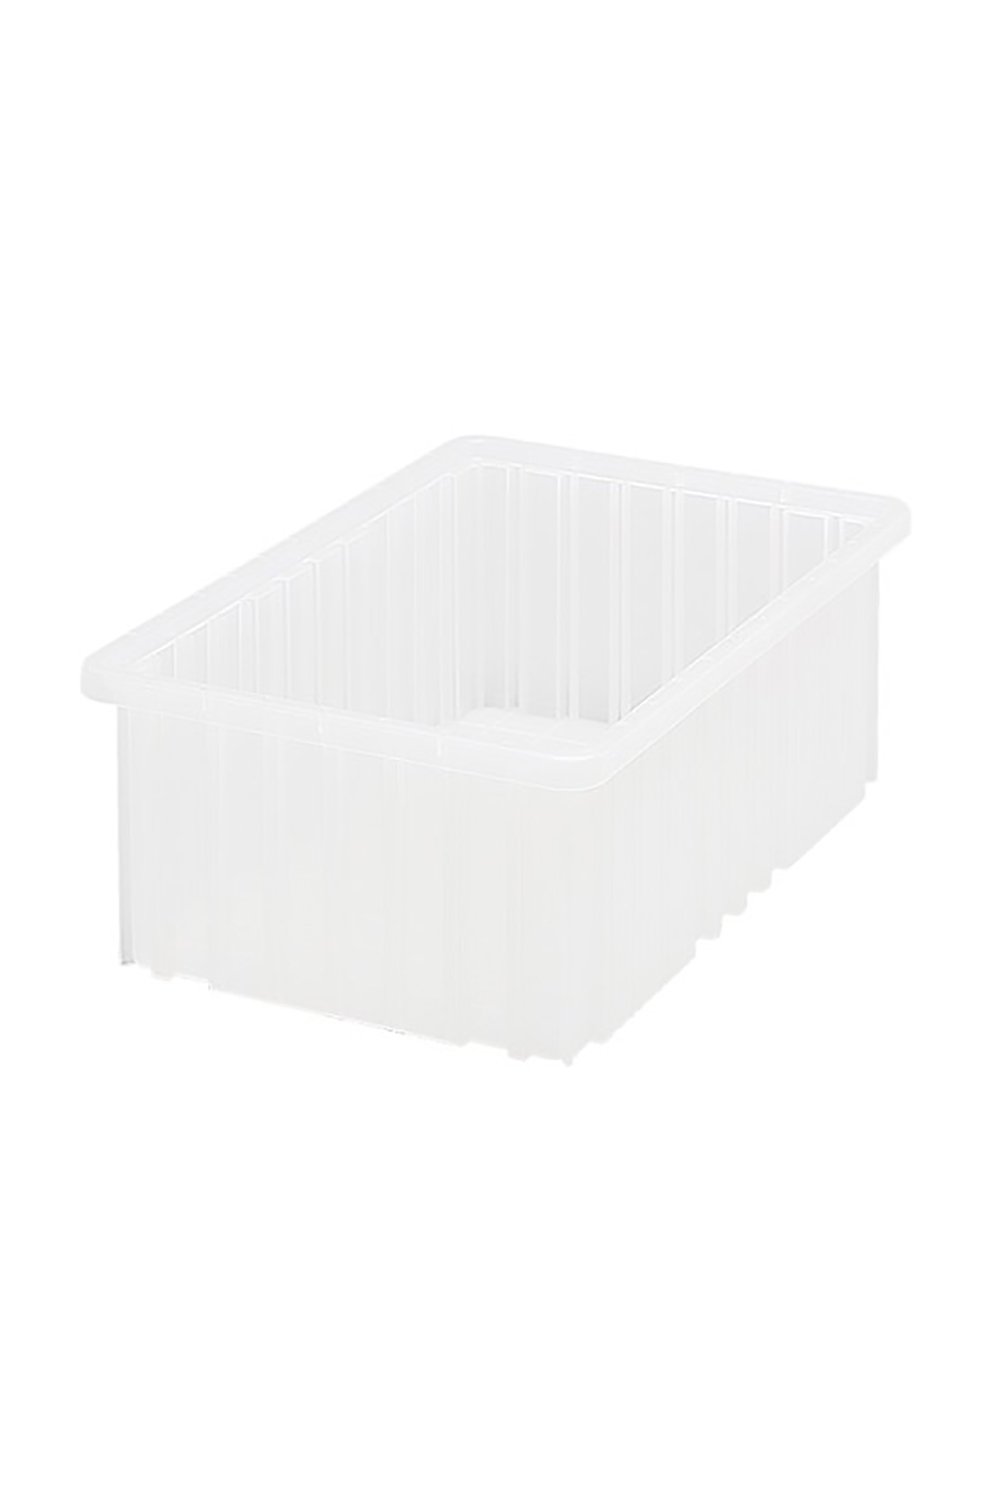 Clear View Dividable Grid Container Bins & Containers Acart 16-1/2"L x 10-7/8"W x 6"H Clear 